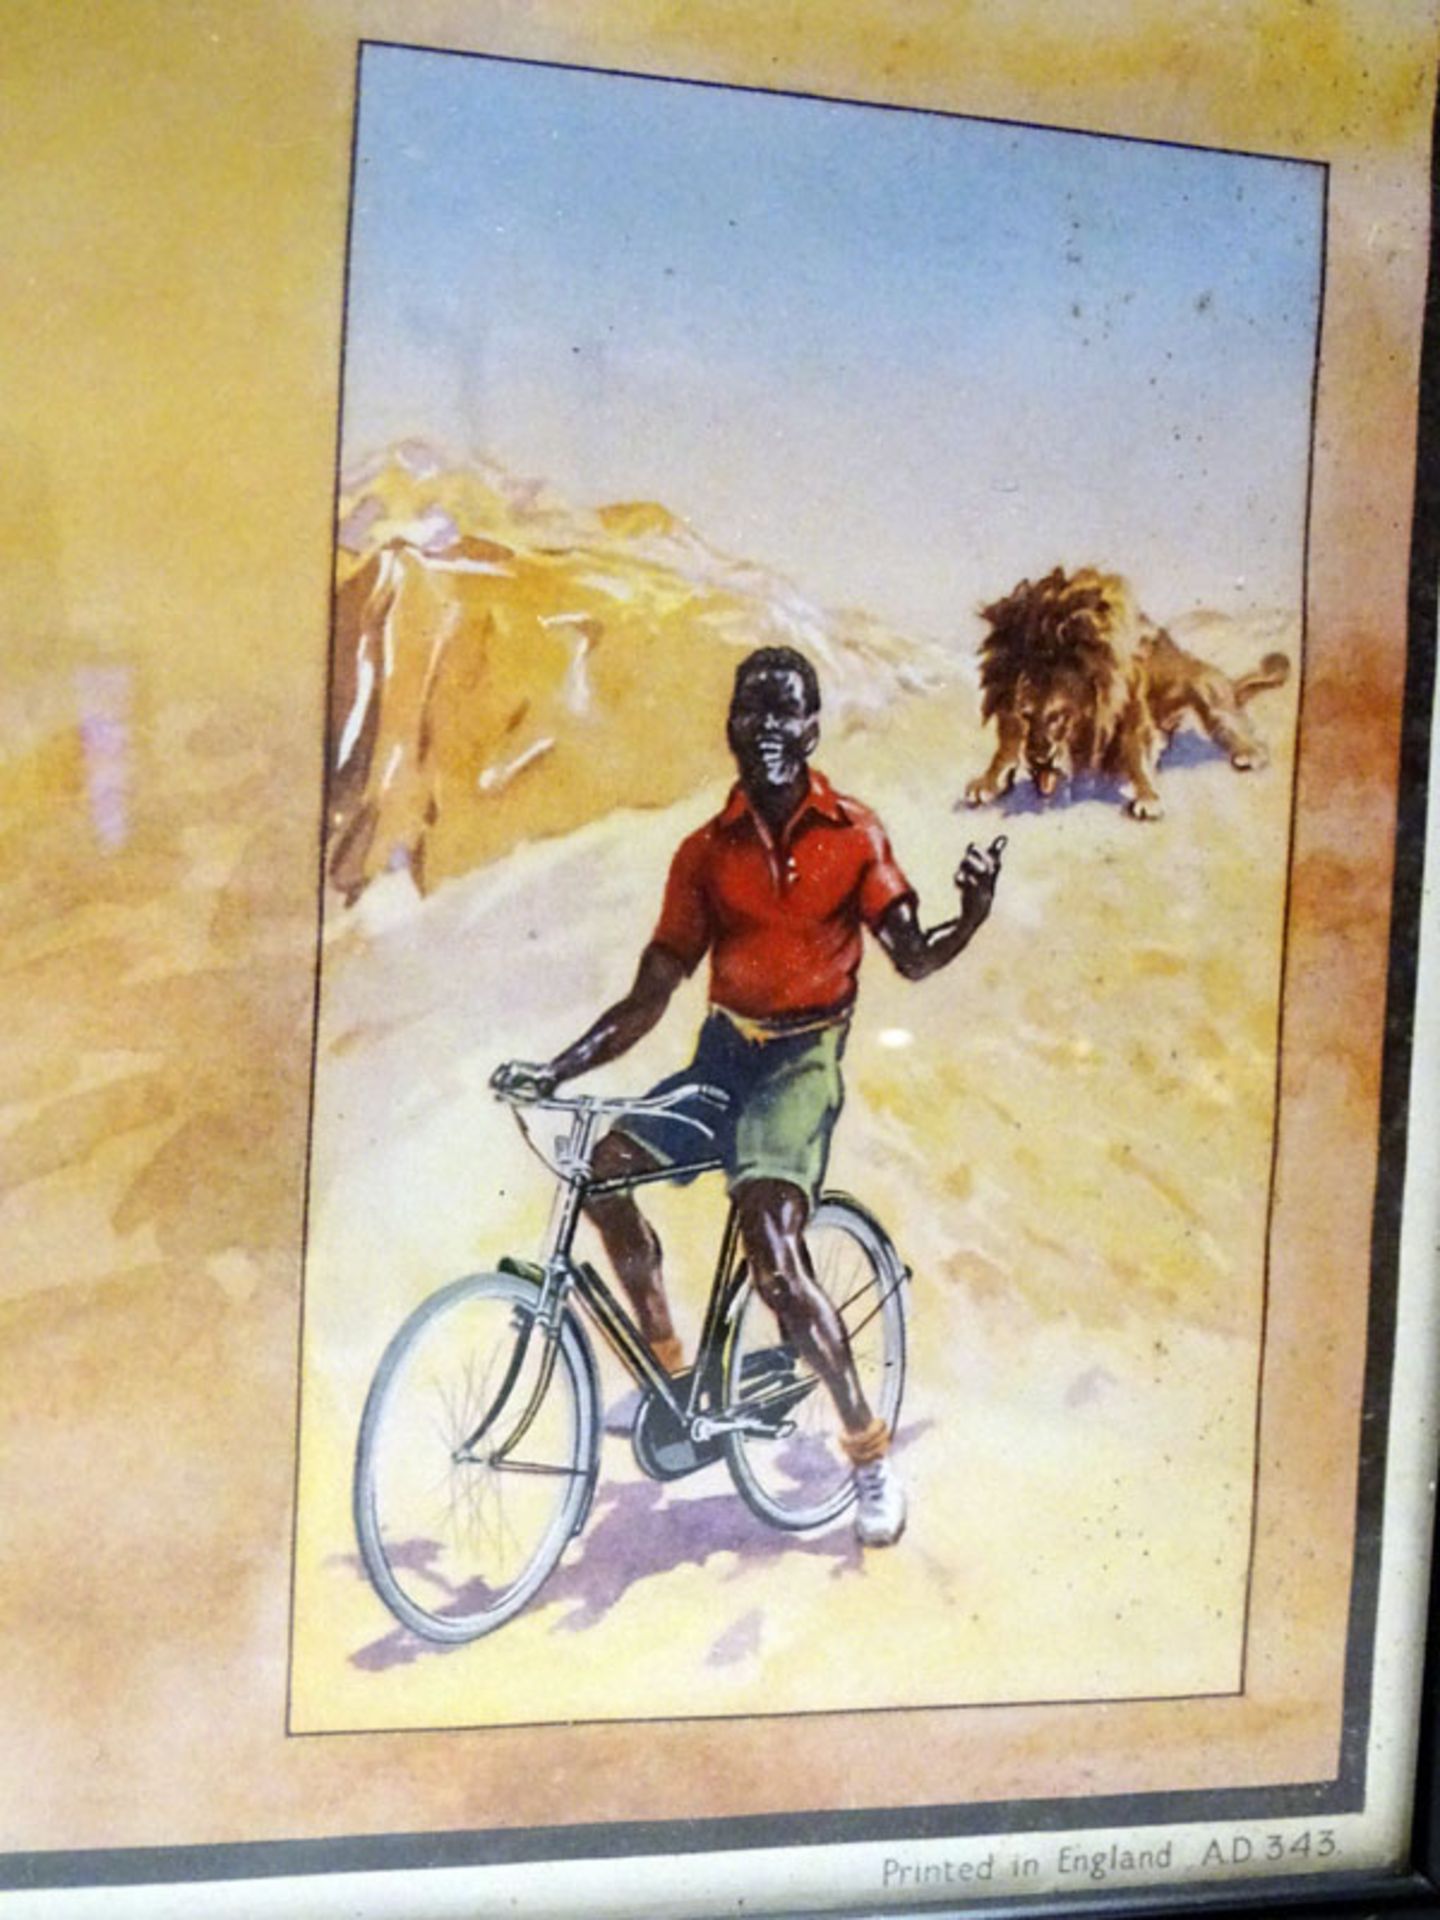 An Original Raleigh Cycles Advertising Poster - Image 2 of 2